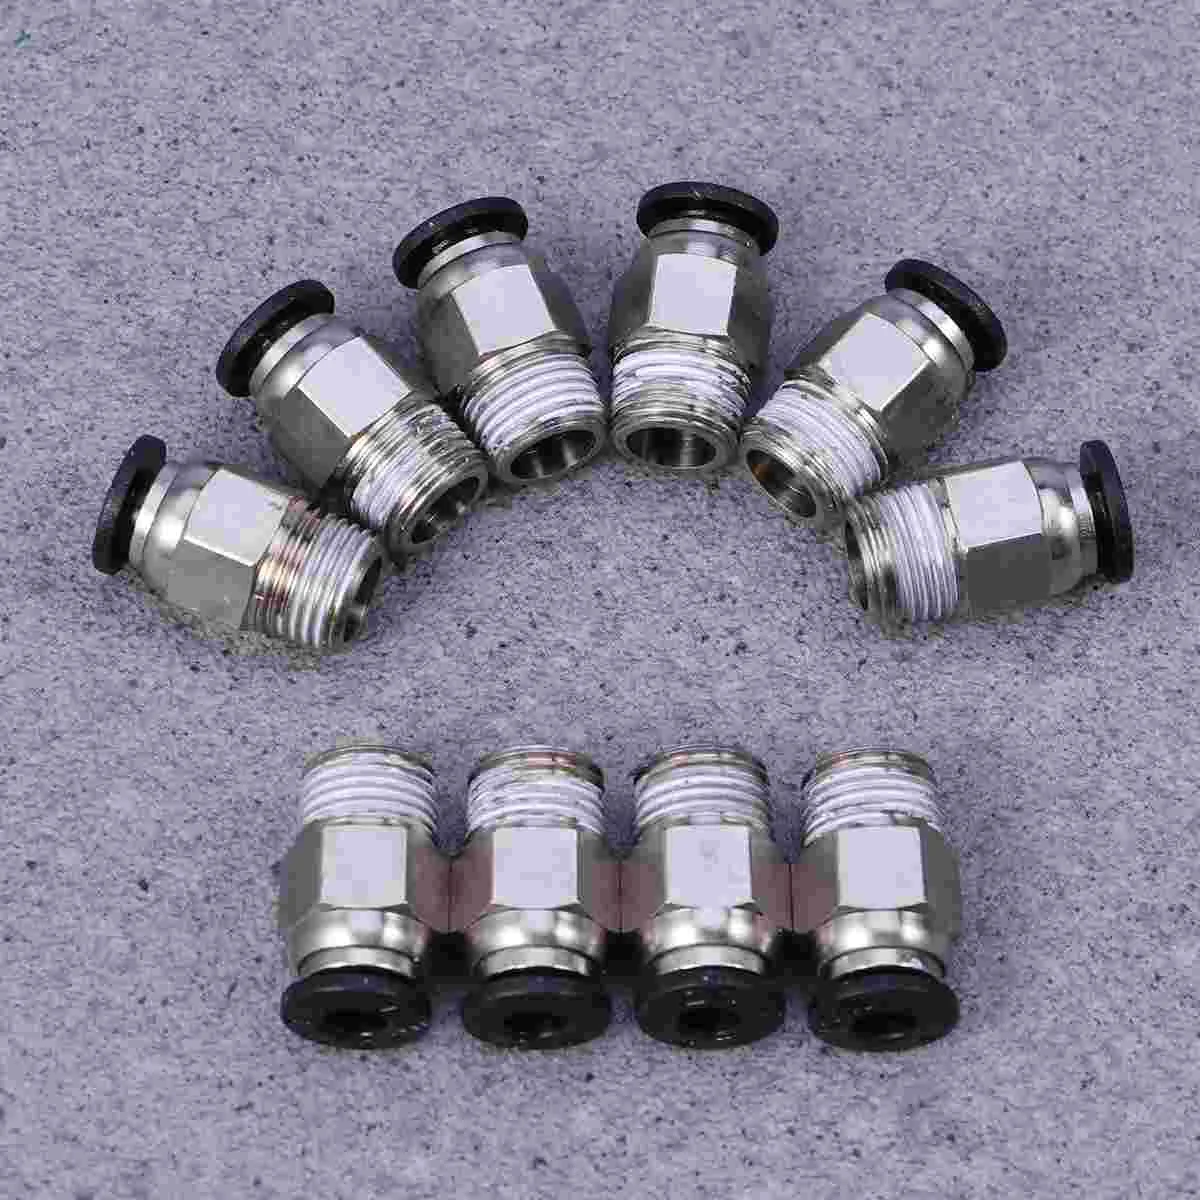 

Tube Bowden Connector Push 3D Straight Ptfe Male Pneumatic Fitting M10 Pc4 Extruder Tubing Pefe Coupler Connect Fittings Thread